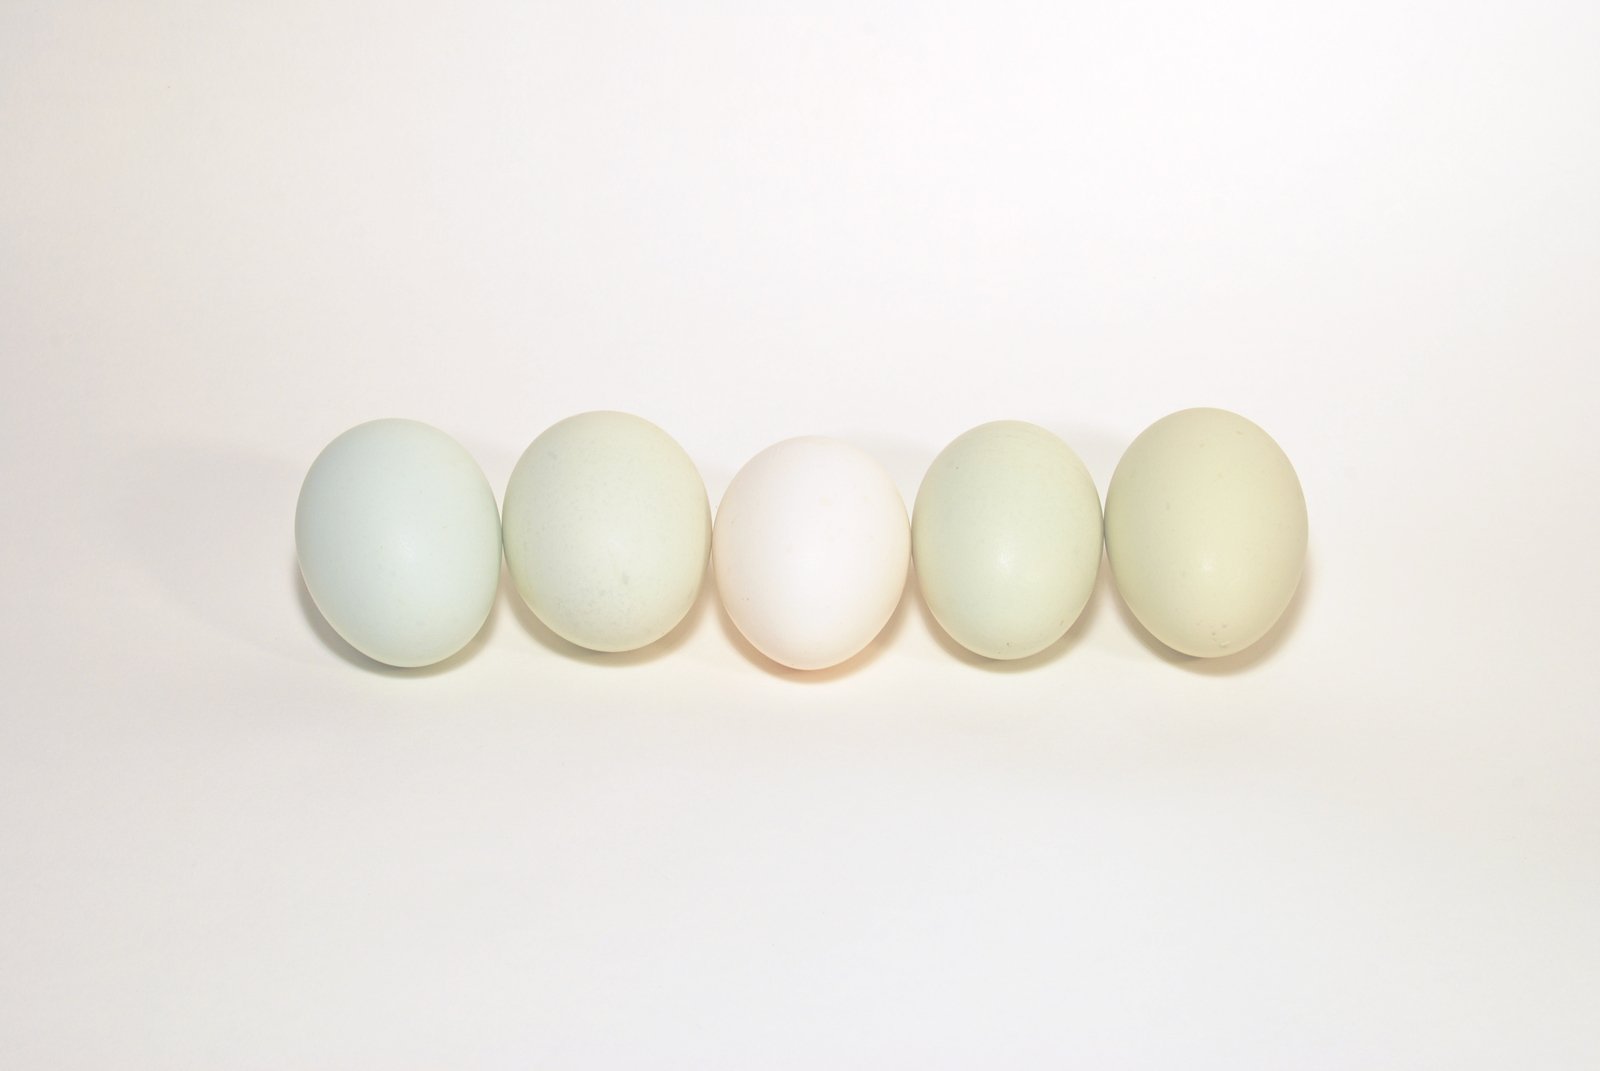 five eggs in a row against a white background